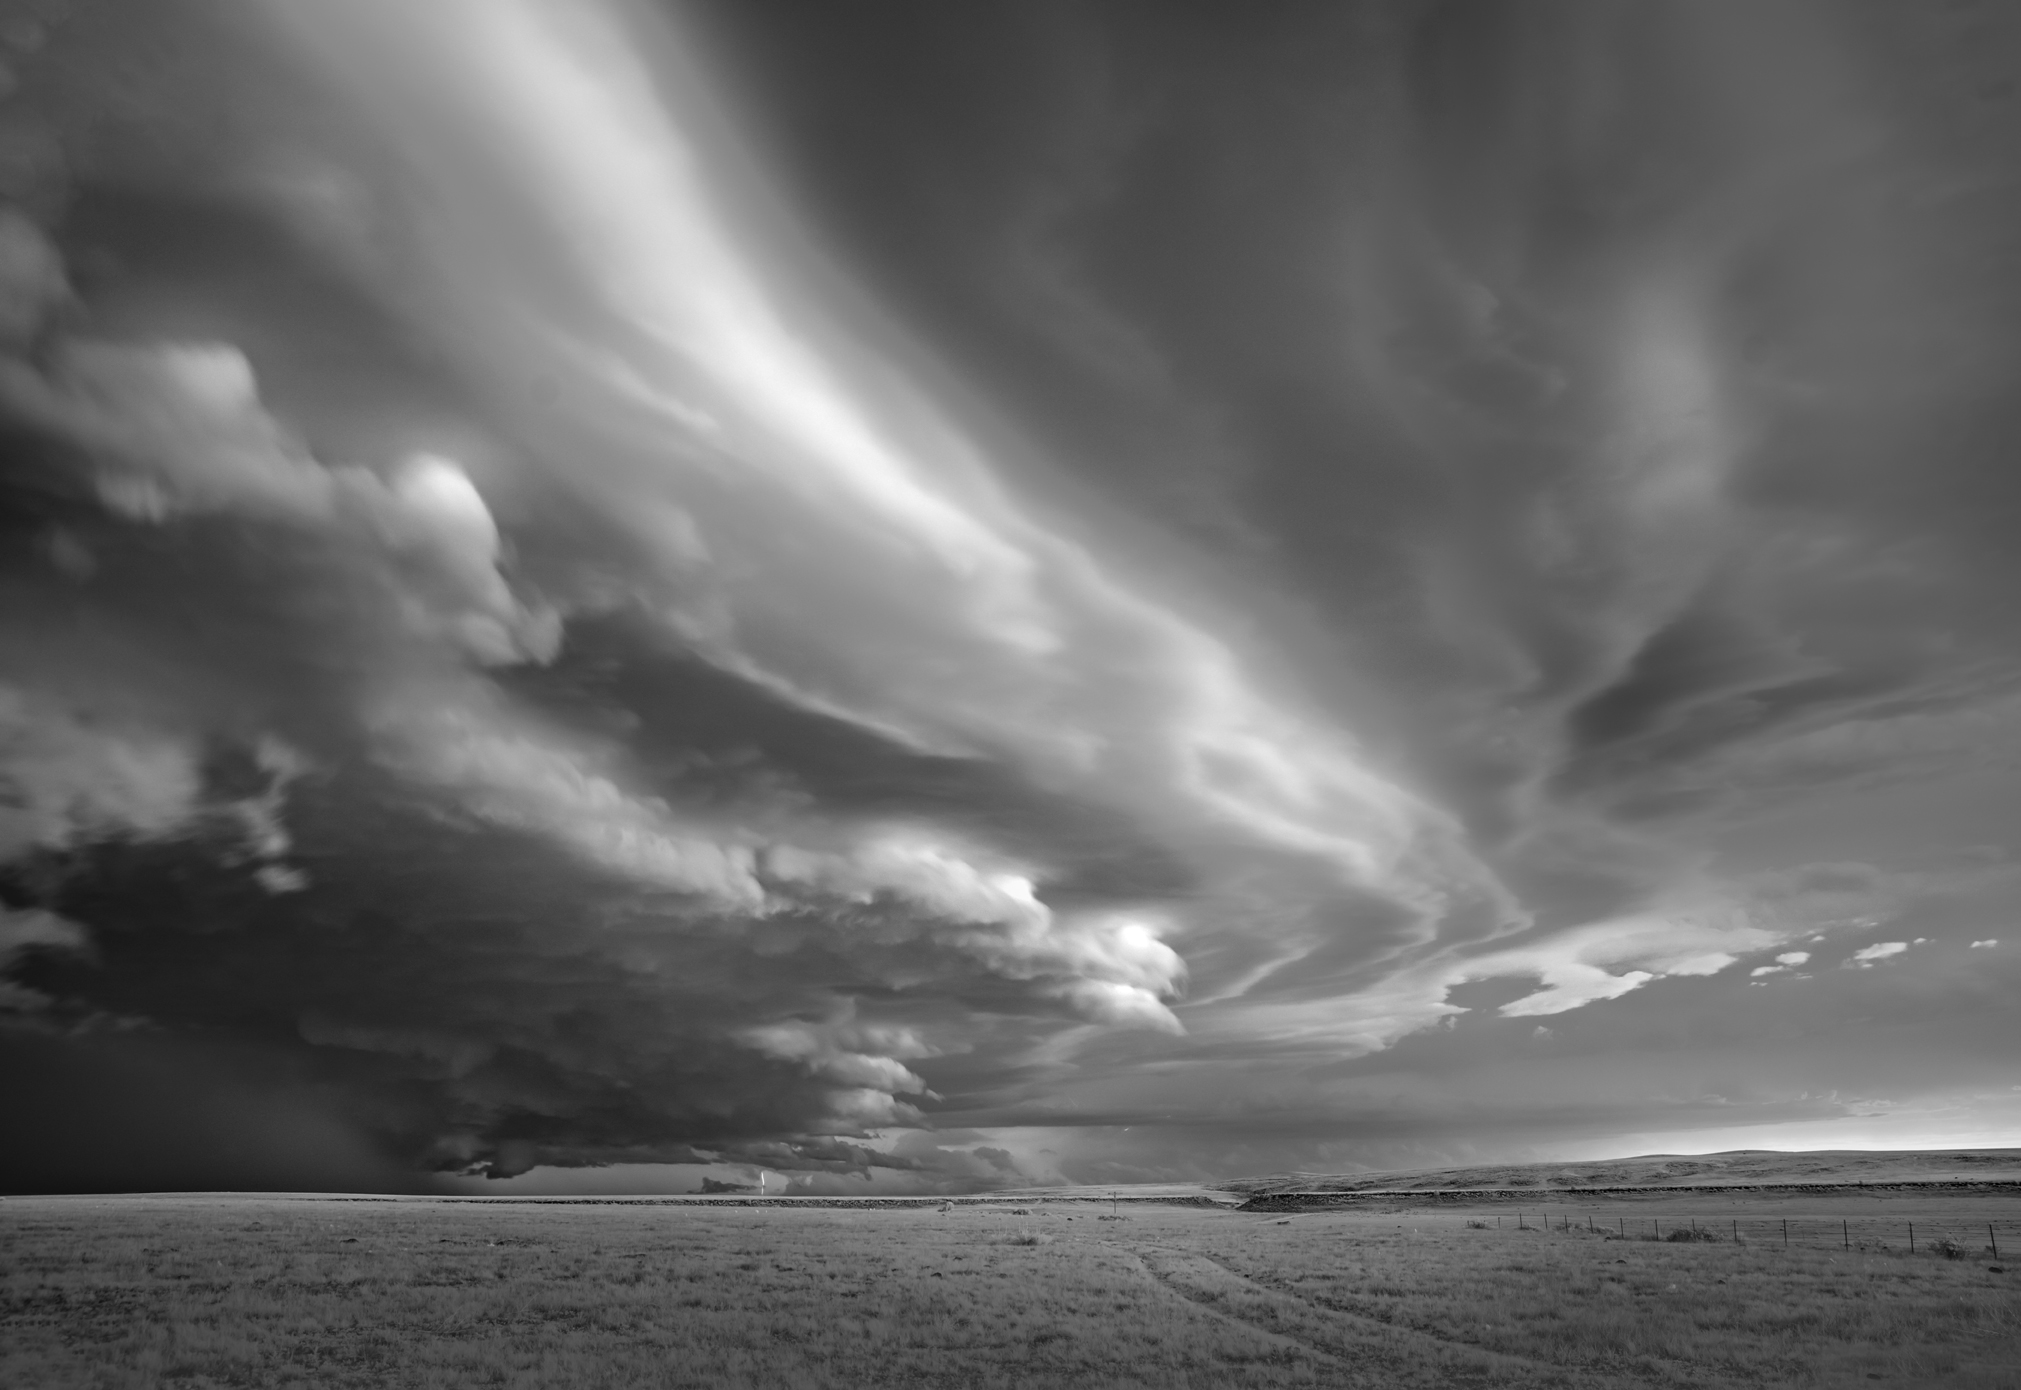 Mitch Dobrowner Supercell Swirls and Lightning